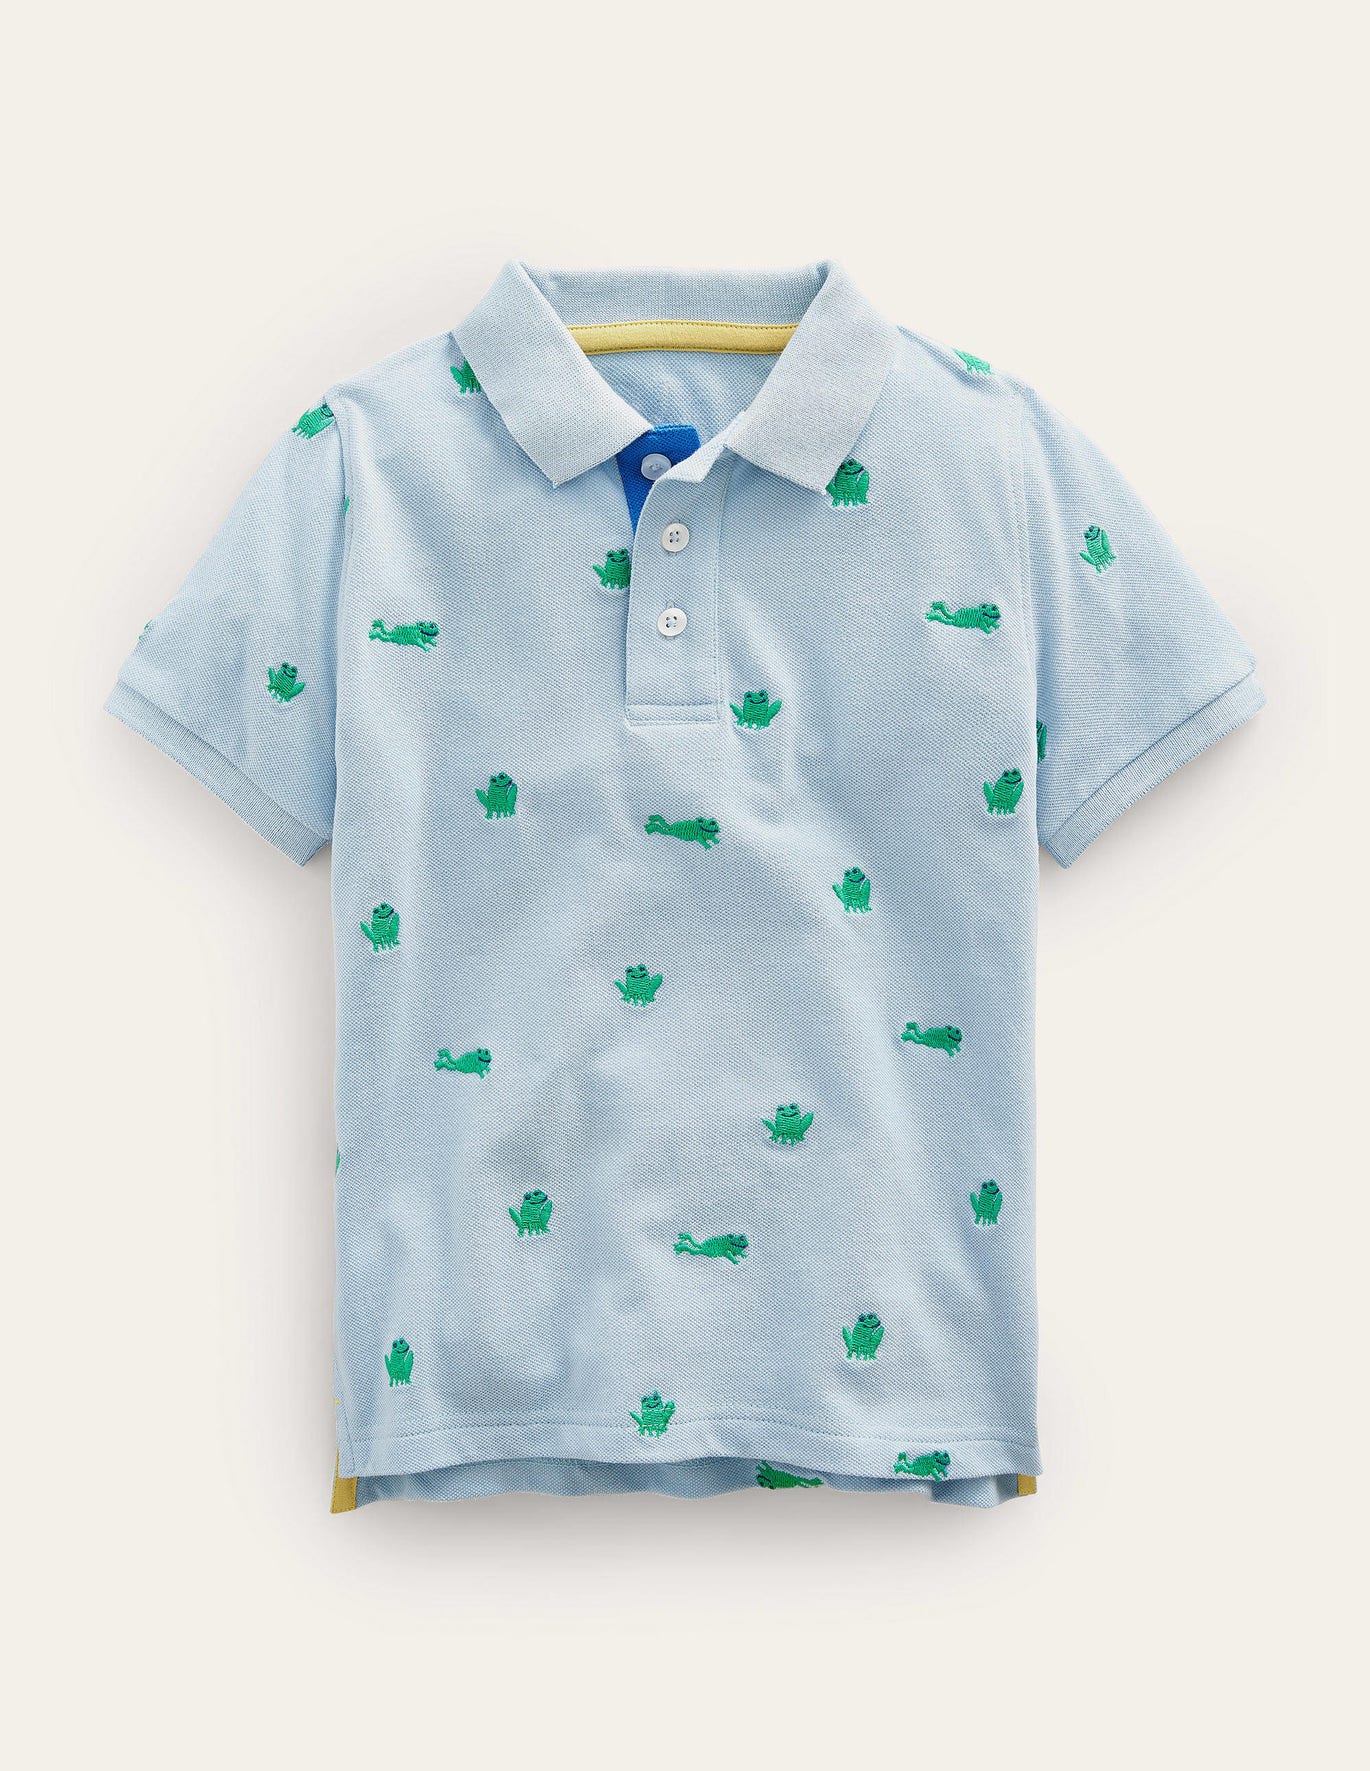 Boden Embroidered Pique Polo Shirt - Surfboard Blue Frogs